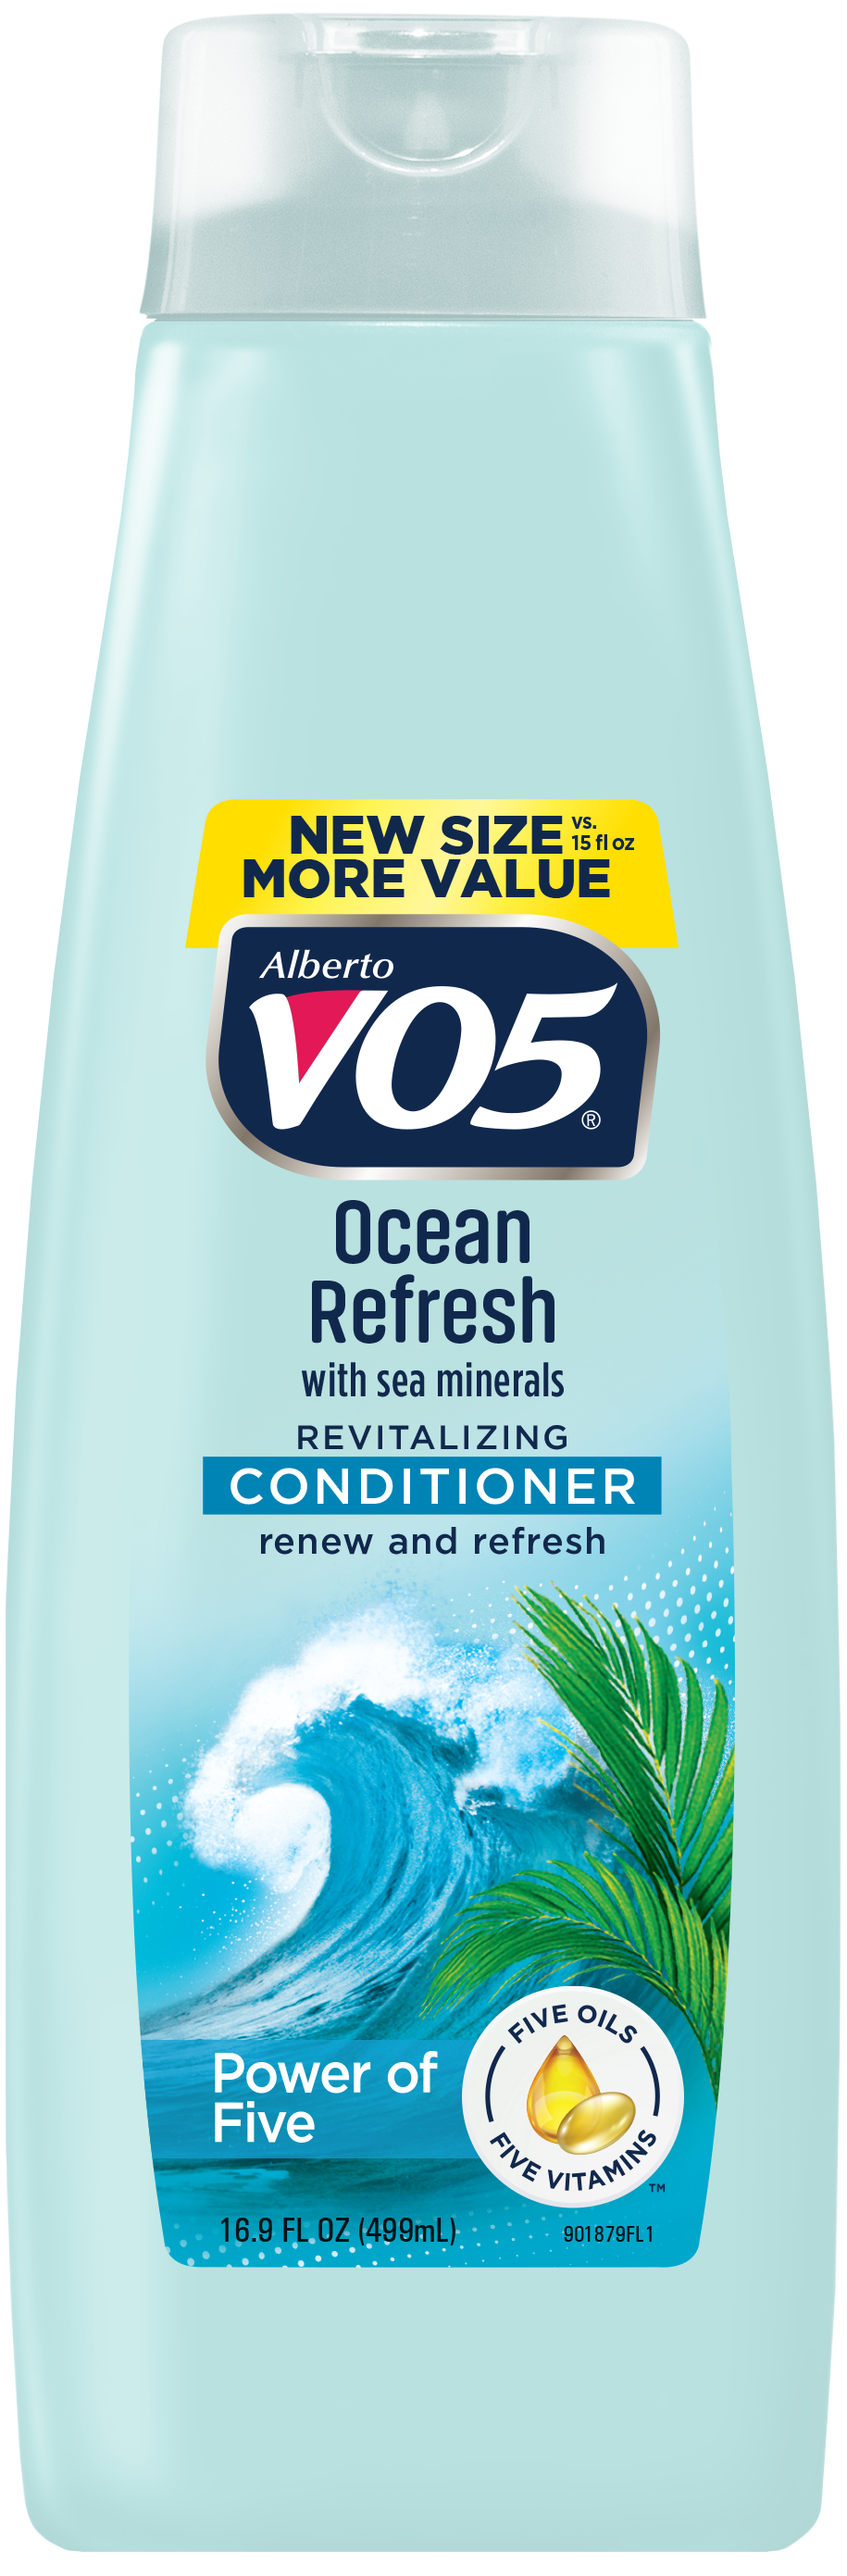 Alberto VO5 Ocean Refresh Revitalizing Conditioner with Sea Minerals, for All Hair Types, 16.9 fl oz - image 1 of 6